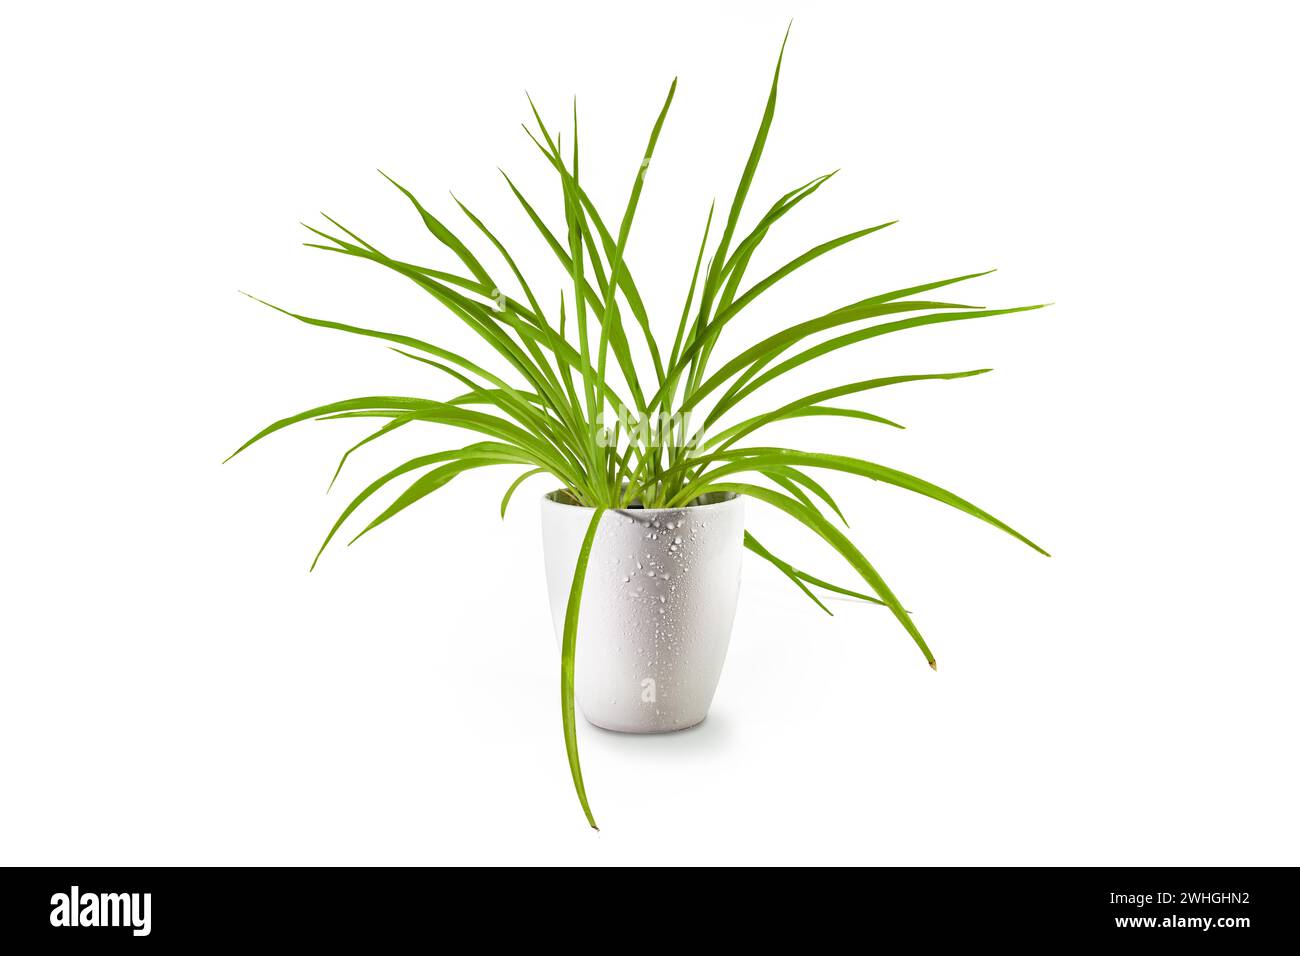 Spider plant (Chlorophytum comosum), an evergreen perennial with long green leaves potted as indoor plant in a porcelain planter Stock Photo